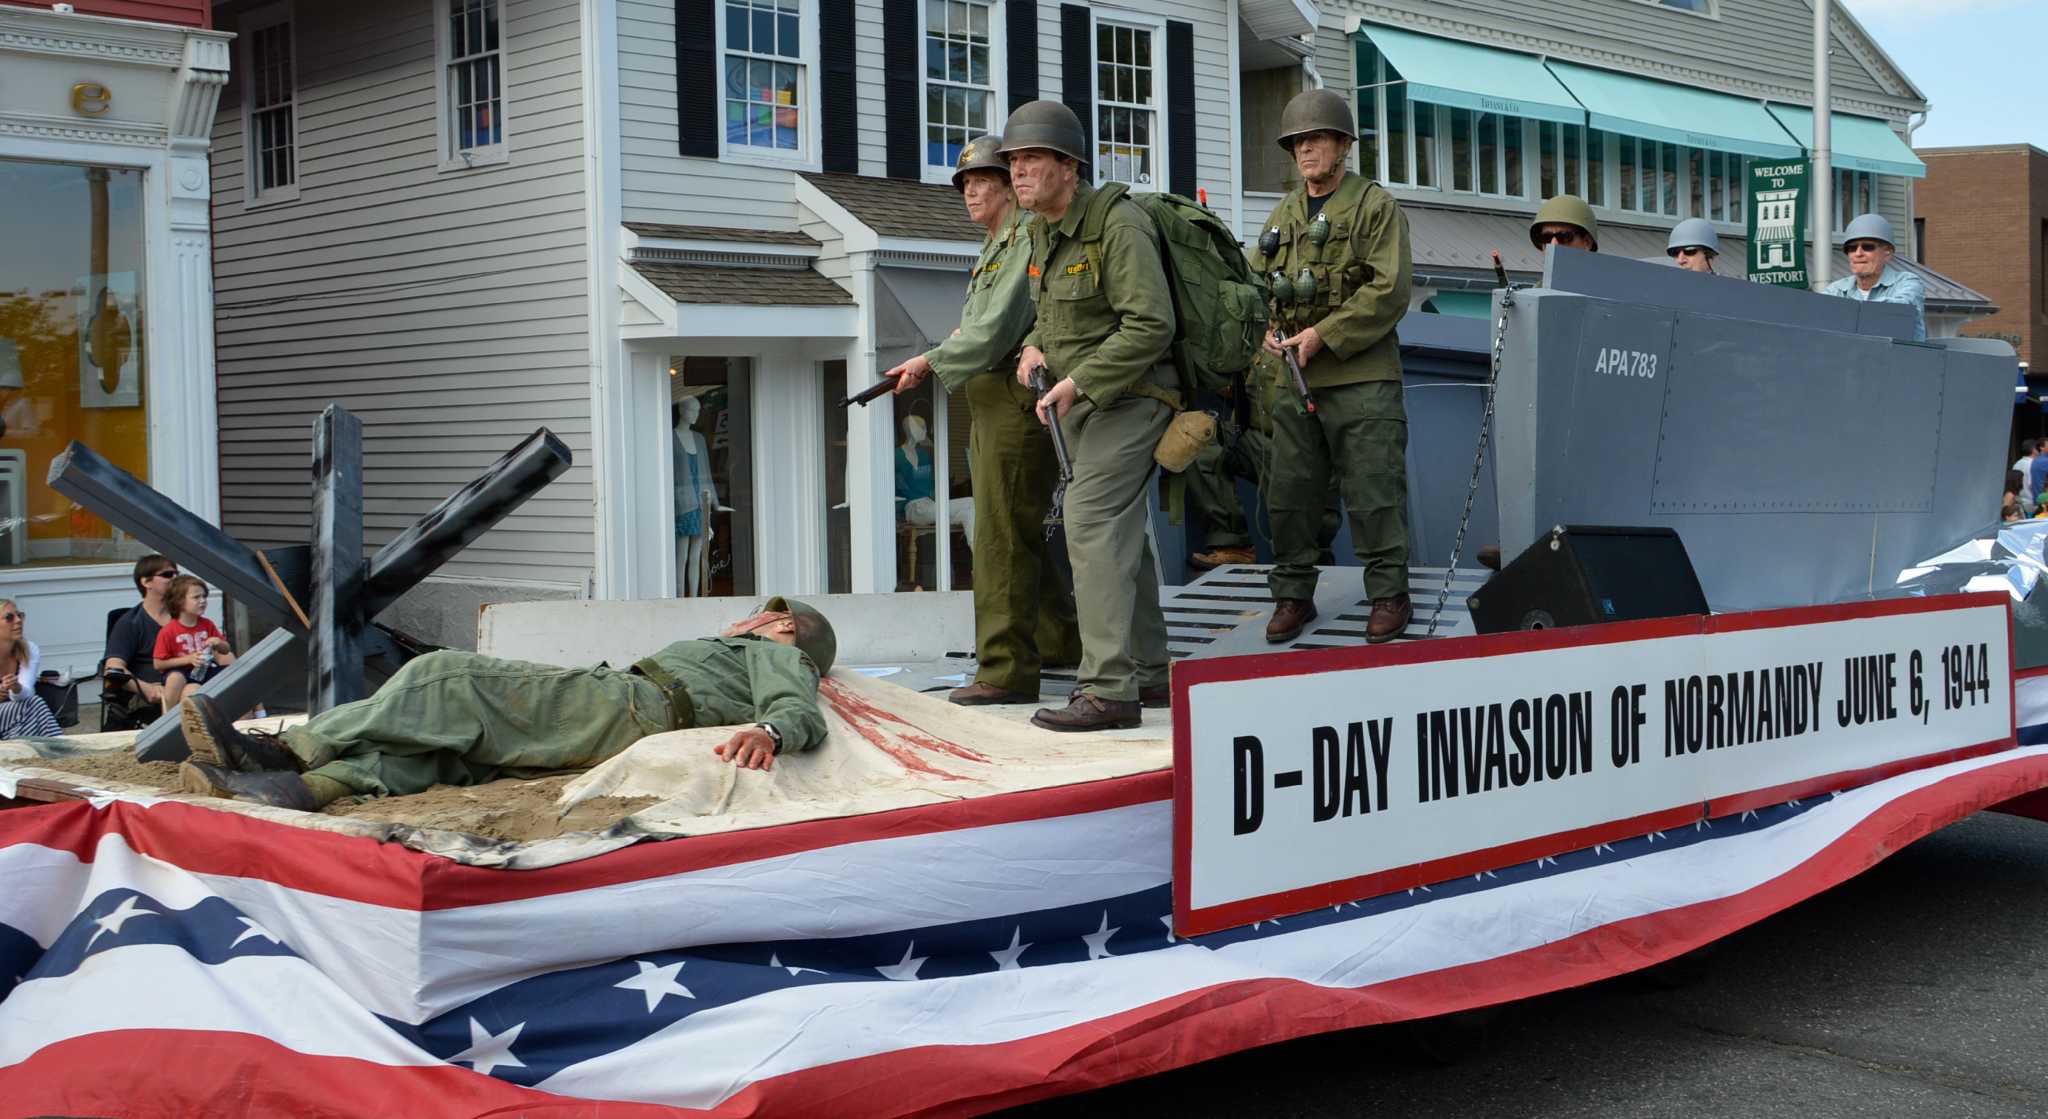 On Memorial Day, Westport steps lively in tribute to the nation's fallen